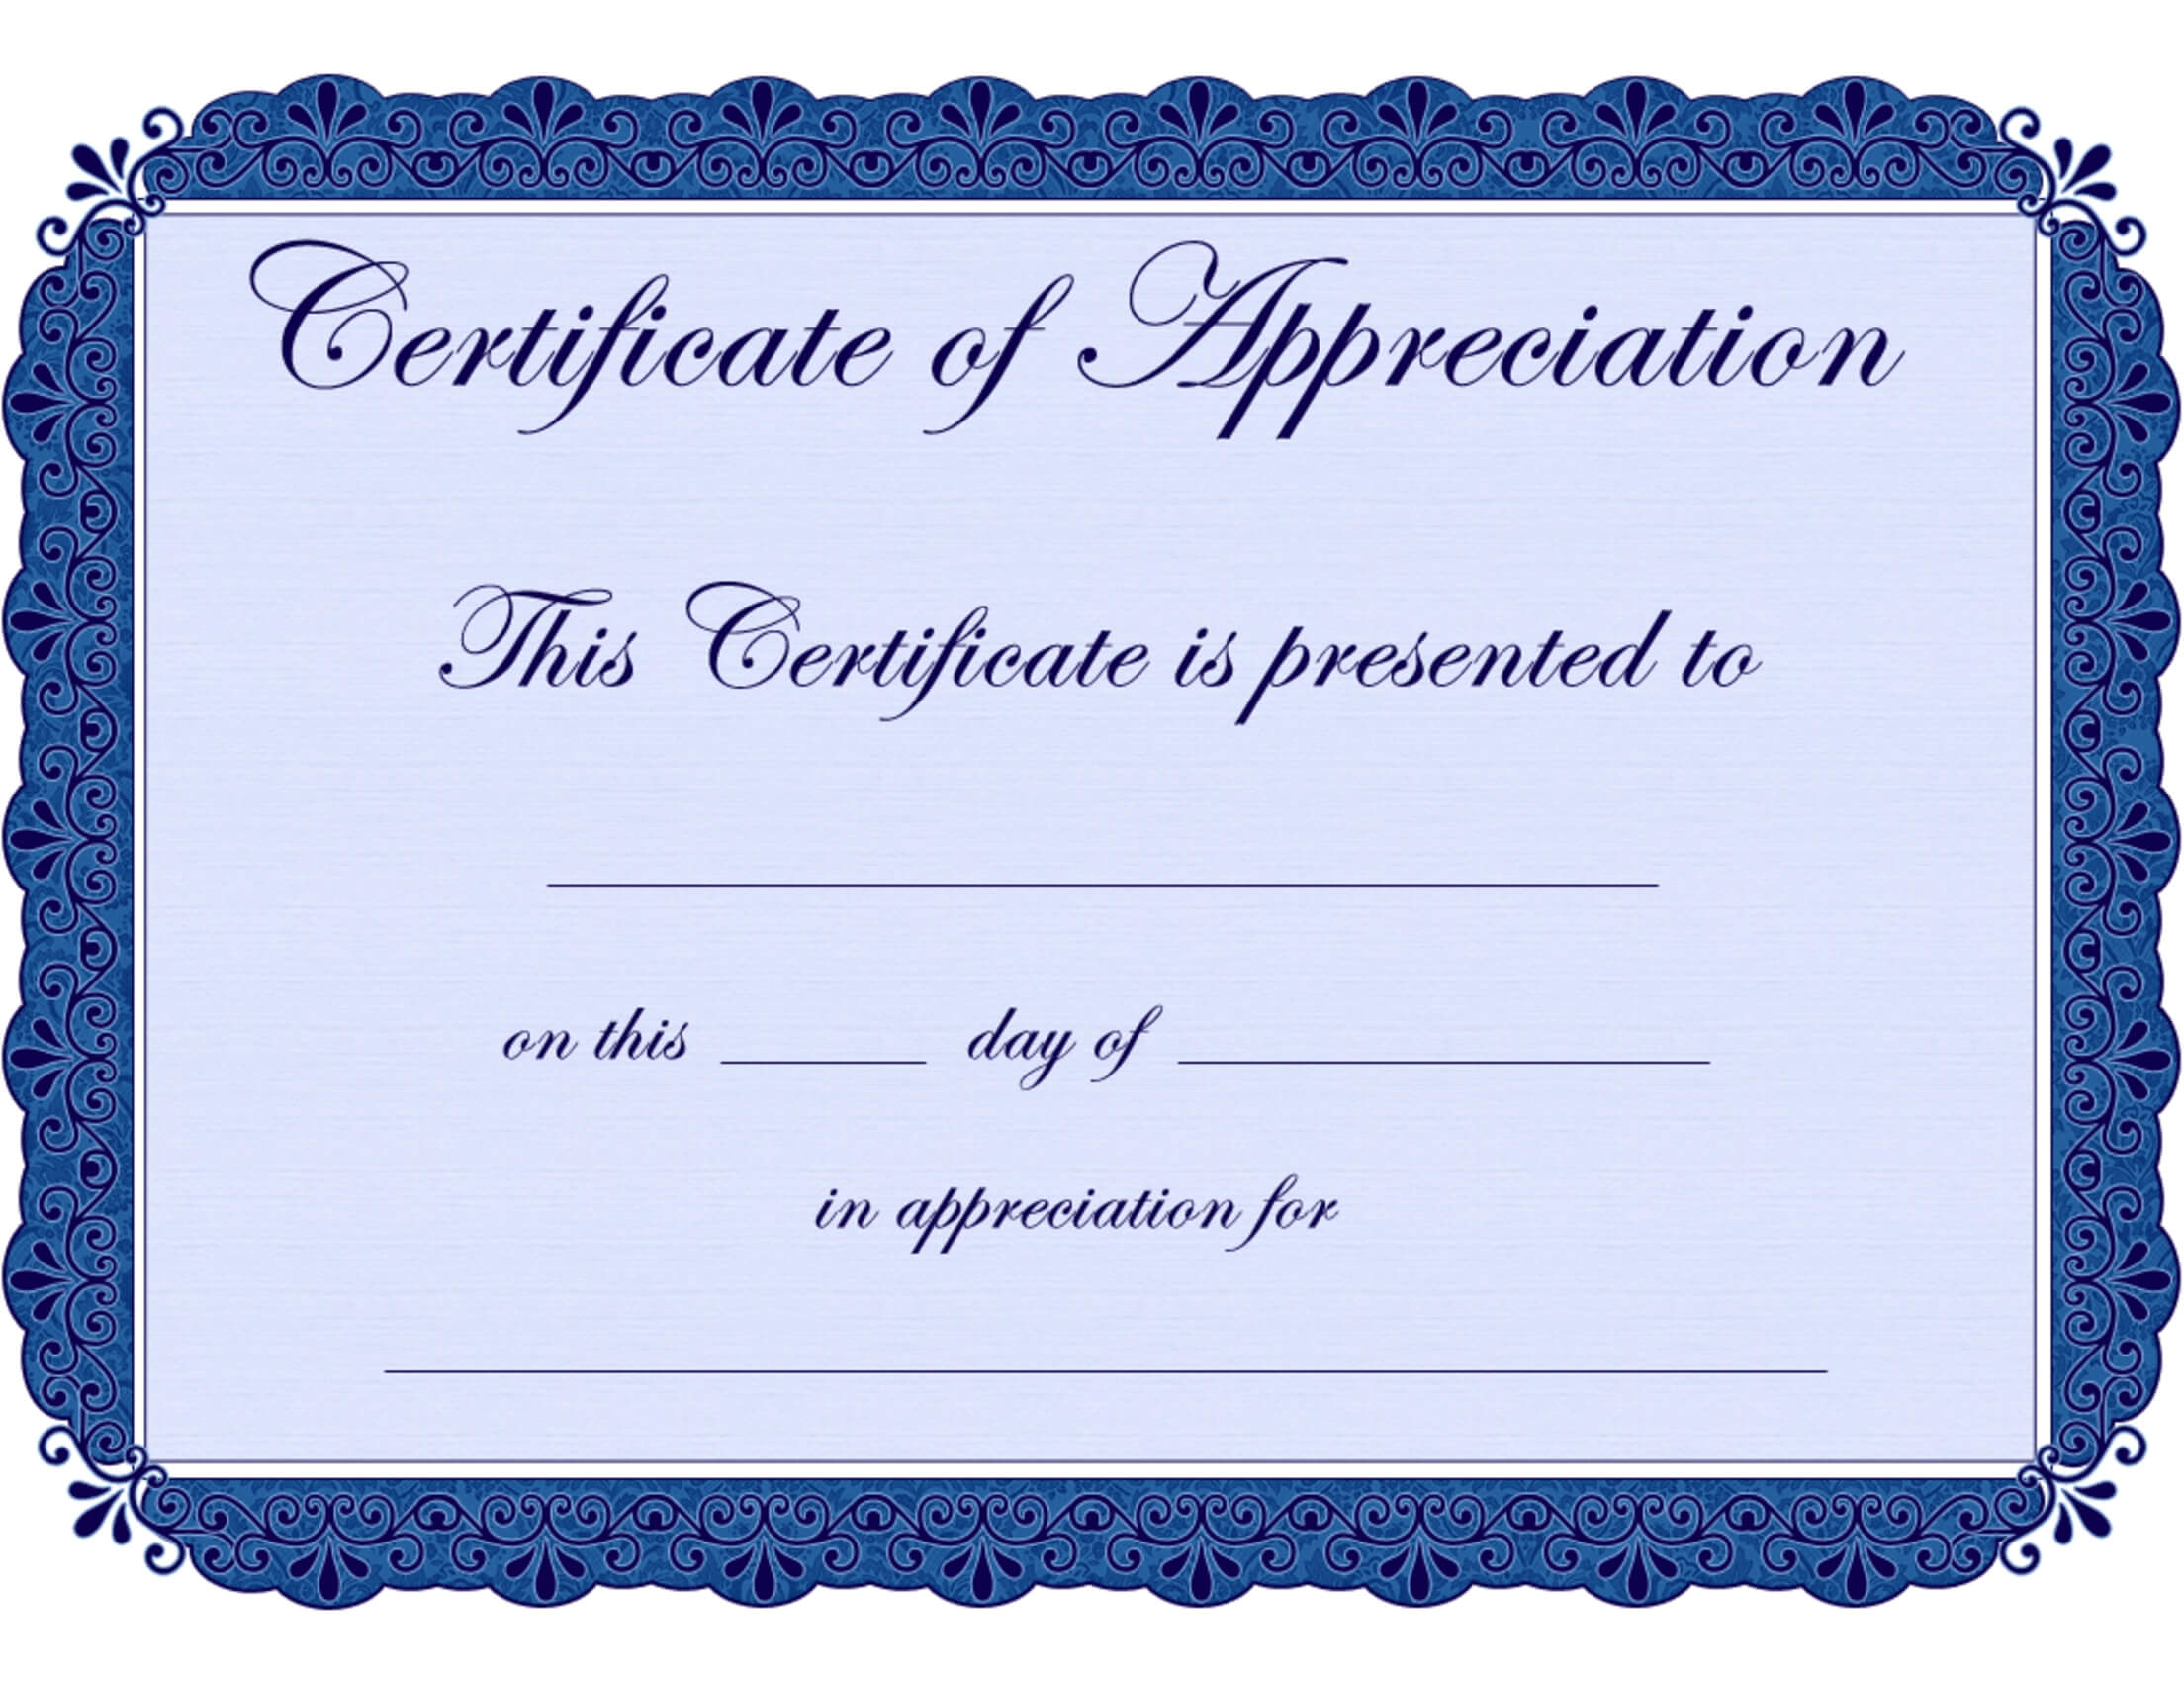 Certificate Template Recognition | Safebest.xyz In Template For Certificate Of Appreciation In Microsoft Word